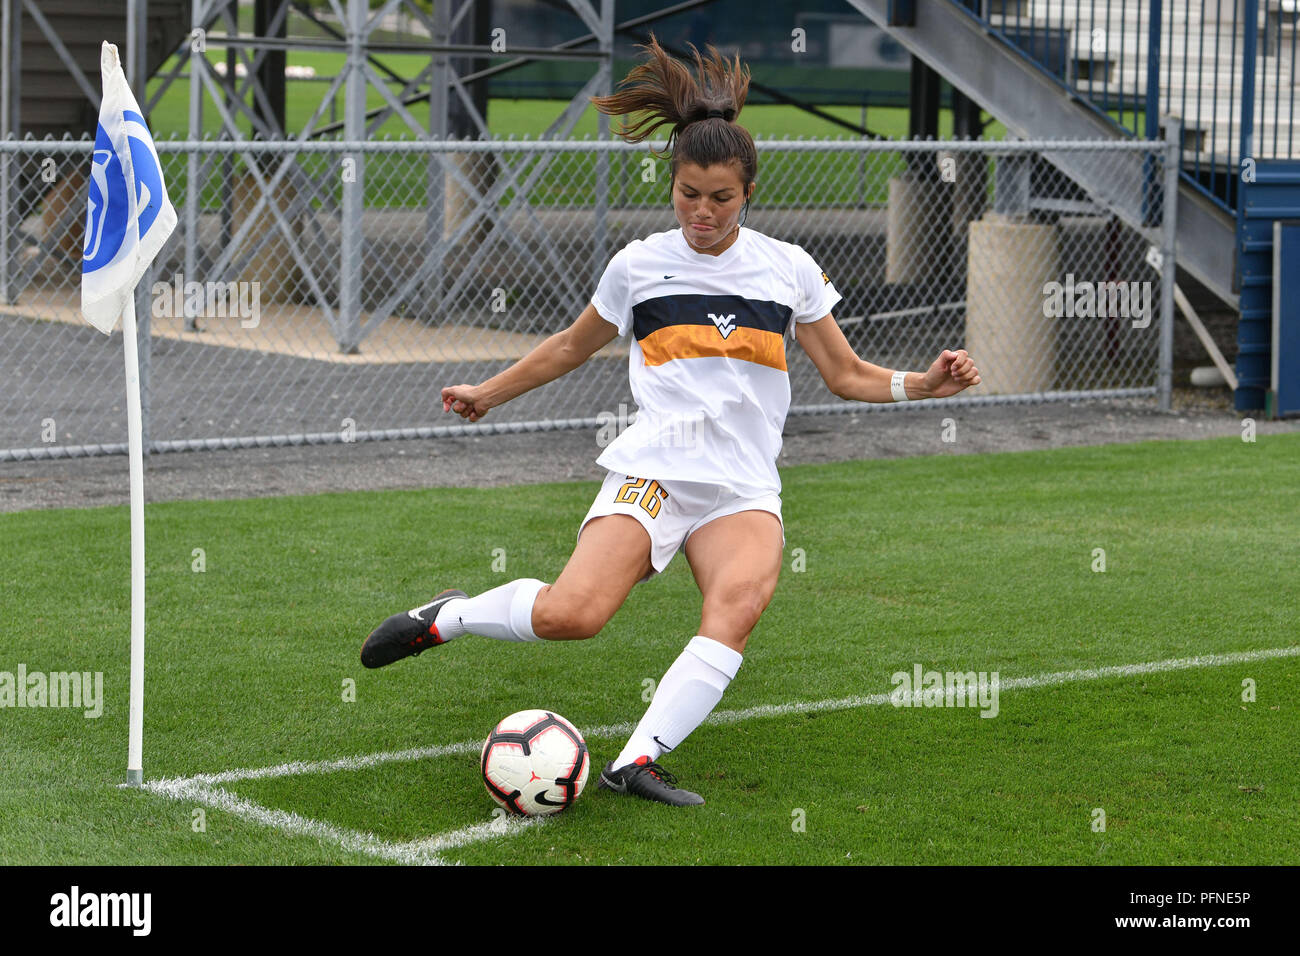 University Park, Pennsylvania, USA. 19th Aug, 2018. WVU women's soccer player VANESSA FLORES (26) takes a corner kick during the NCAA women's soccer match played at Jeffrey Field in University Park, PA. WVU and Arkansas finished in a 1-1 draw after two overtimes. Credit: Ken Inness/ZUMA Wire/Alamy Live News Stock Photo